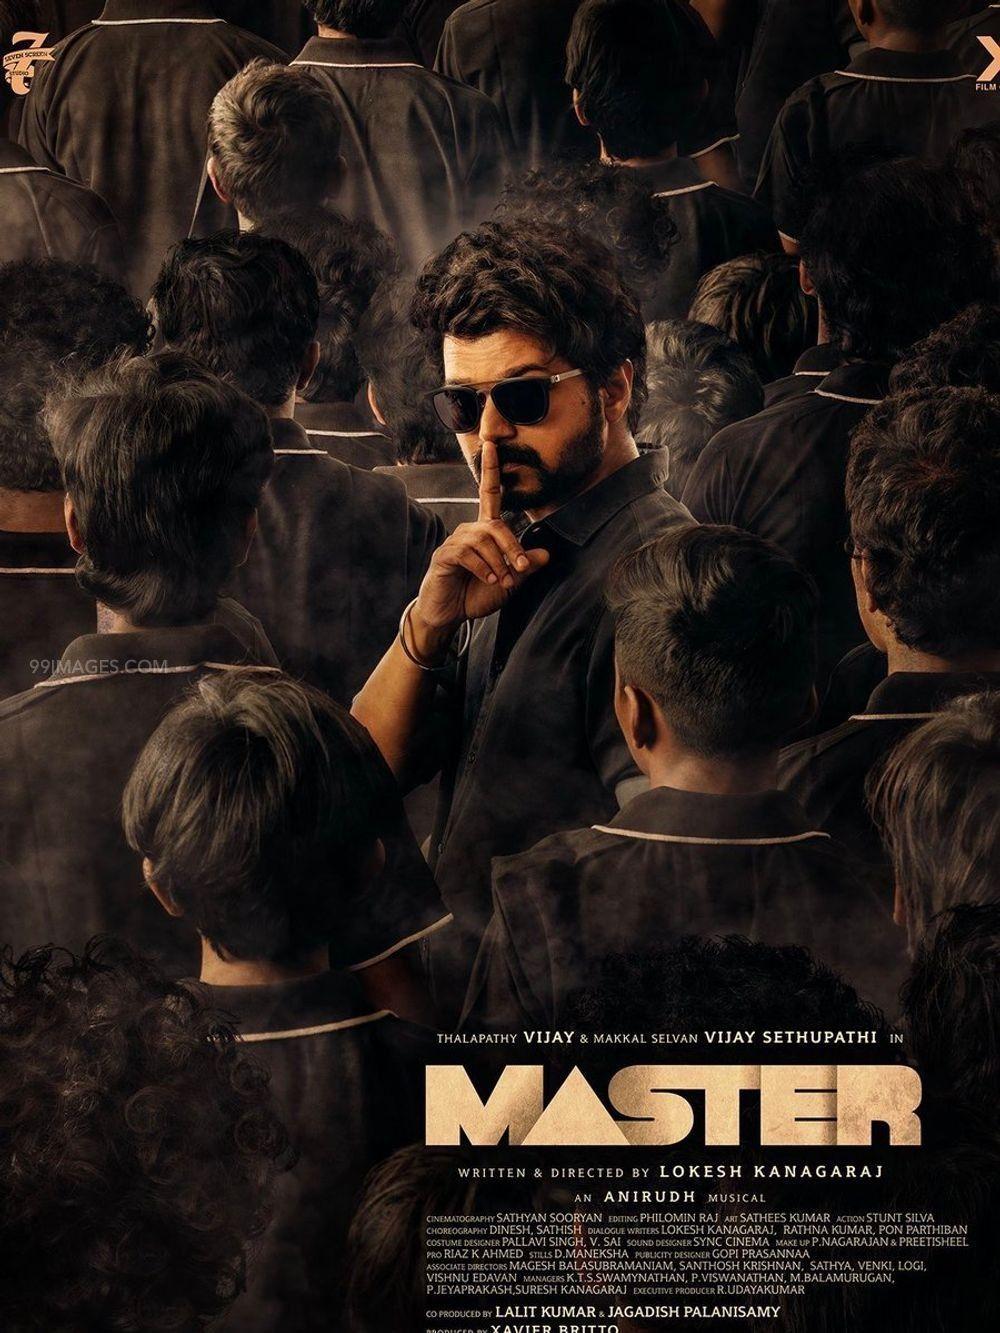 Master Vijay Hd Wallpapers Top Free Master Vijay Hd Backgrounds Wallpaperaccess My goal is to capture scenes from various video games to be used for live (video) wallpapers. master vijay hd wallpapers top free